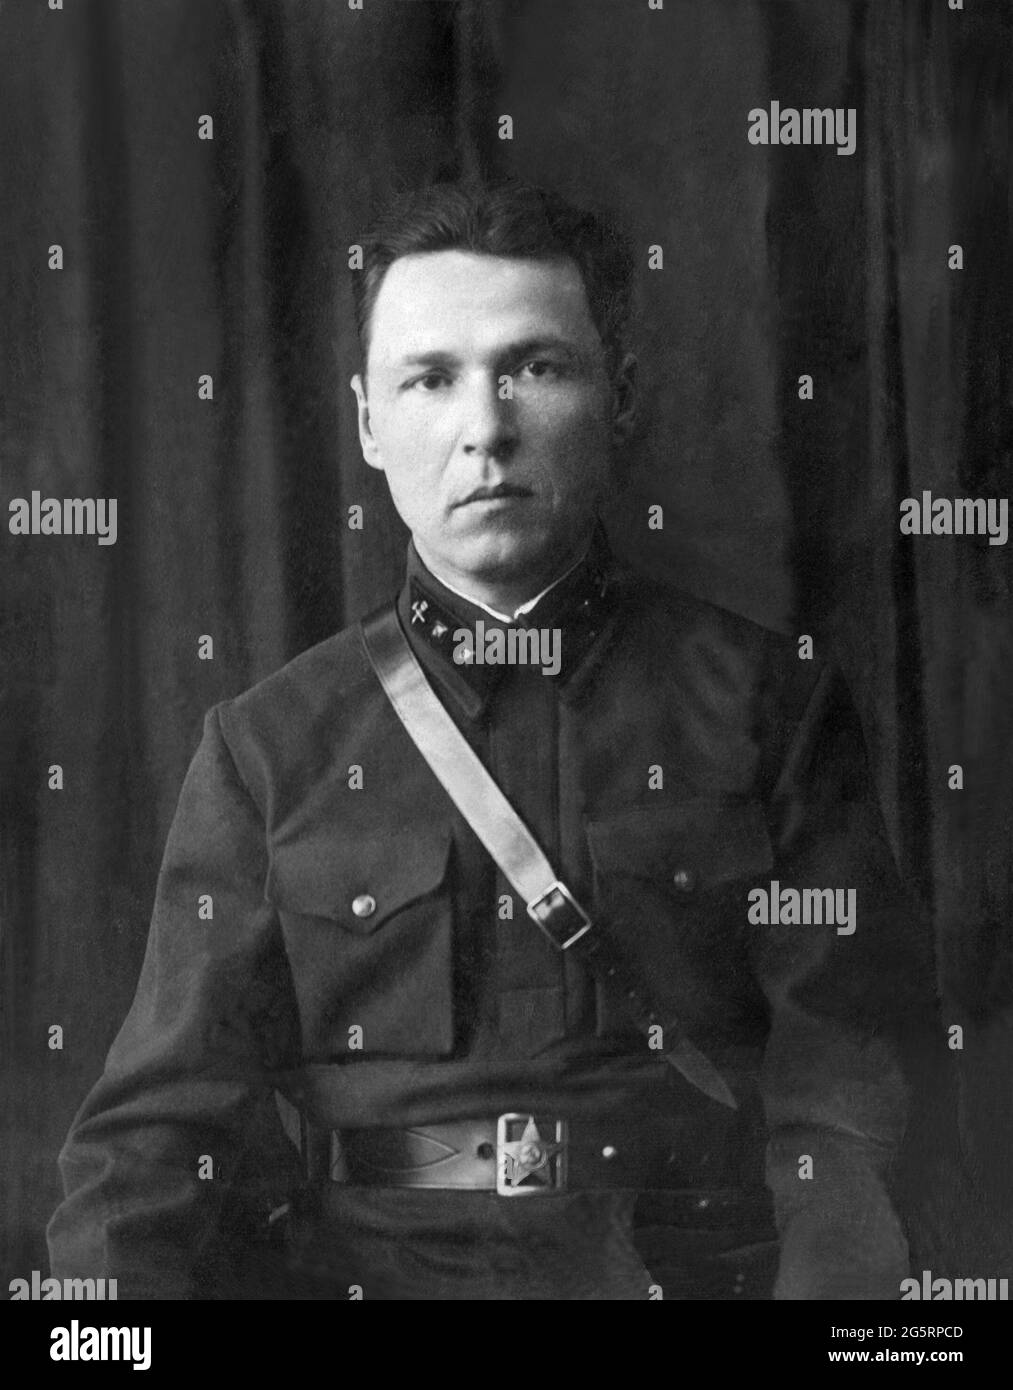 USSR - circa 1941: Photo taken in the USSR modern retouch, portrait of a lieutenant officer of the Red Army railway troops. Stock Photo